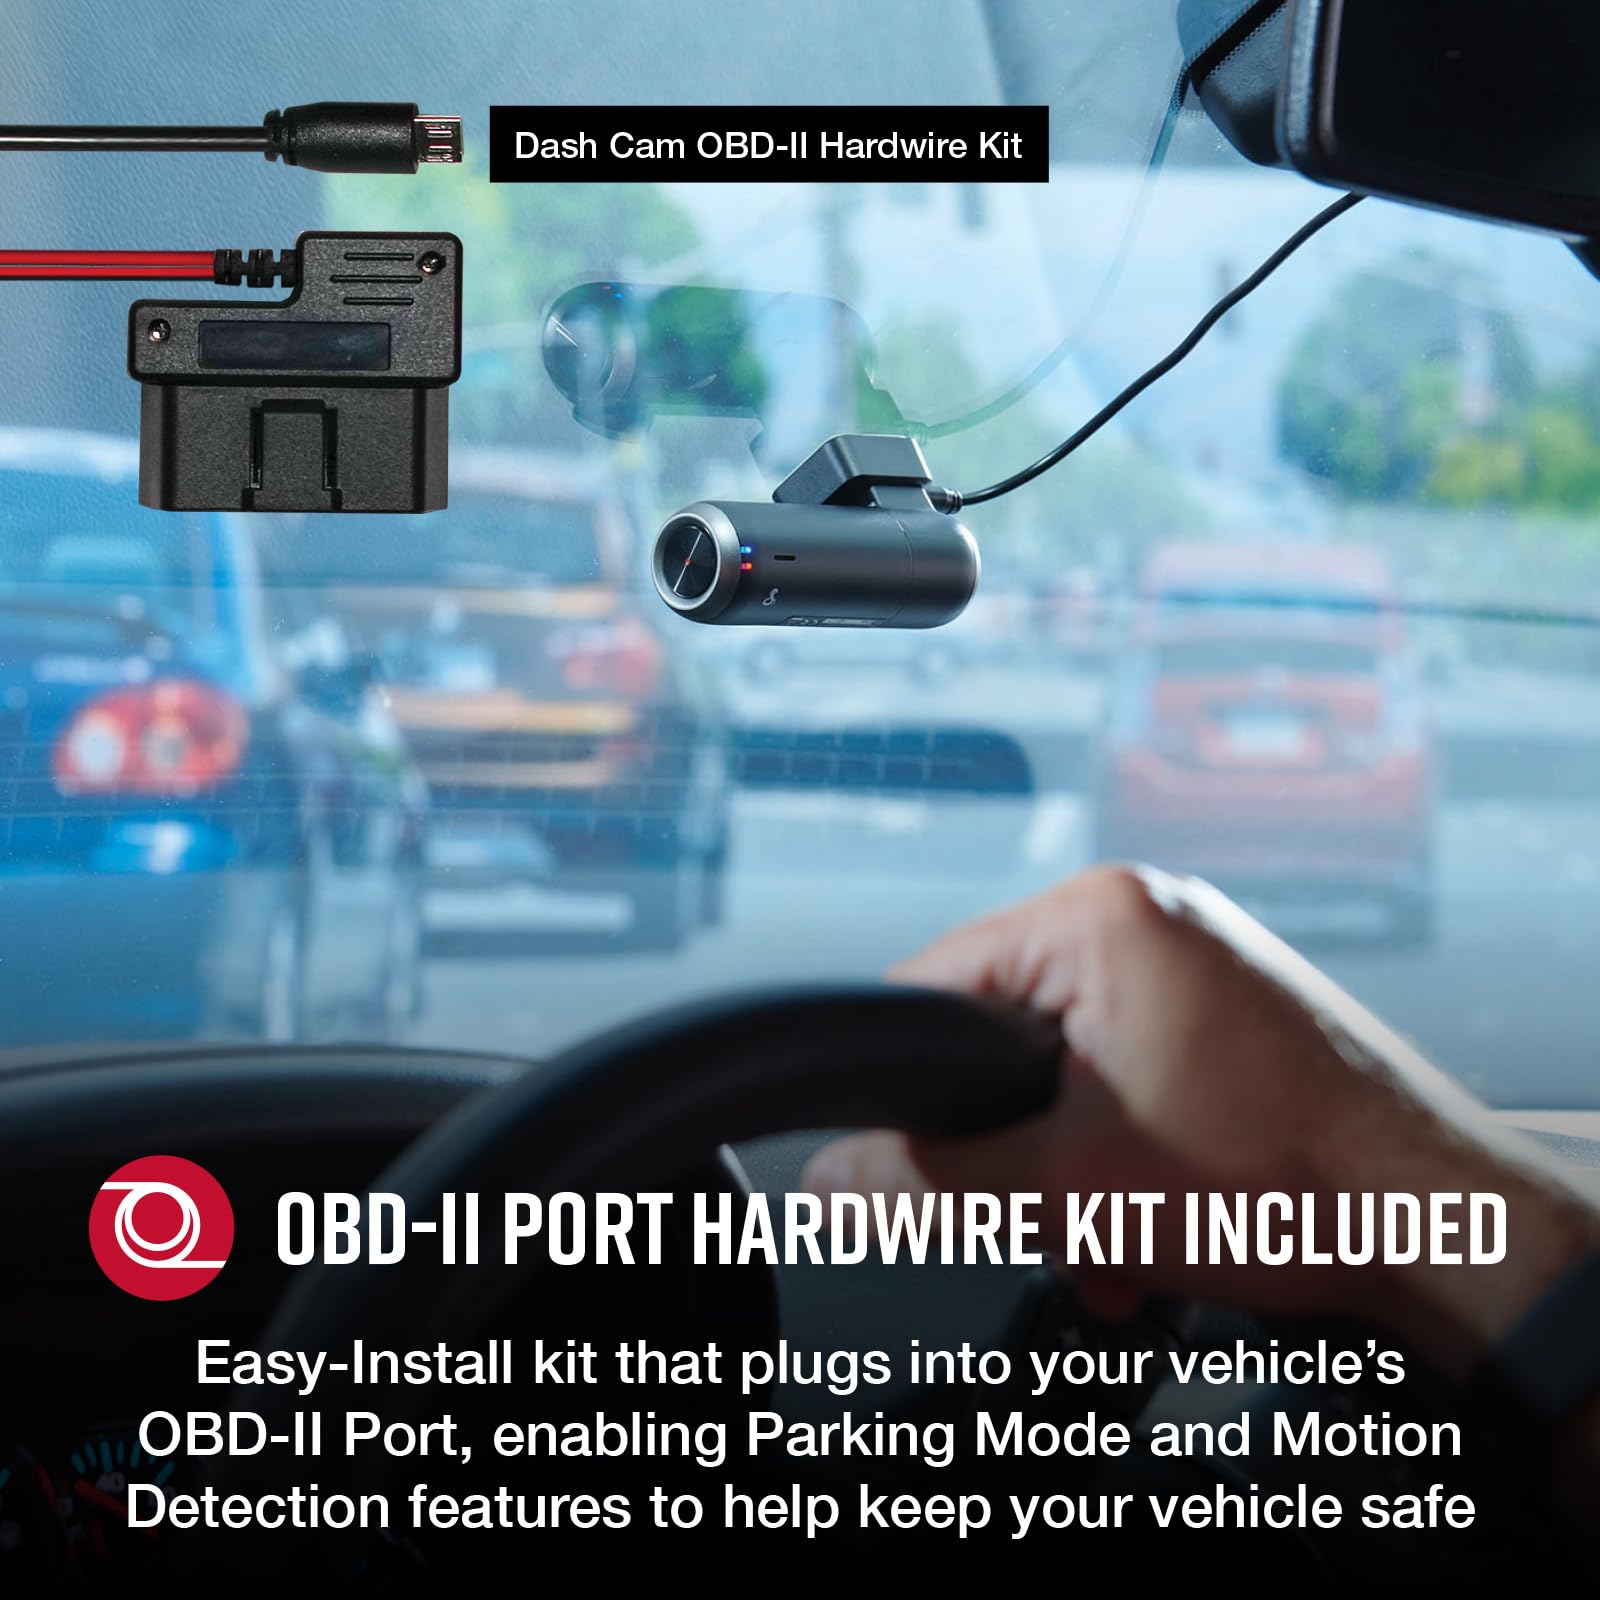 Cobra RAD 700i Laser Radar Detector & SC100 Smart Dash Cam + 2.5A OBD Port to Micro USB Hardwire Kit: Long Range Front and Rear Detection, DSP, Full HD 1080P Resolution, Built-in WiFi & GPS